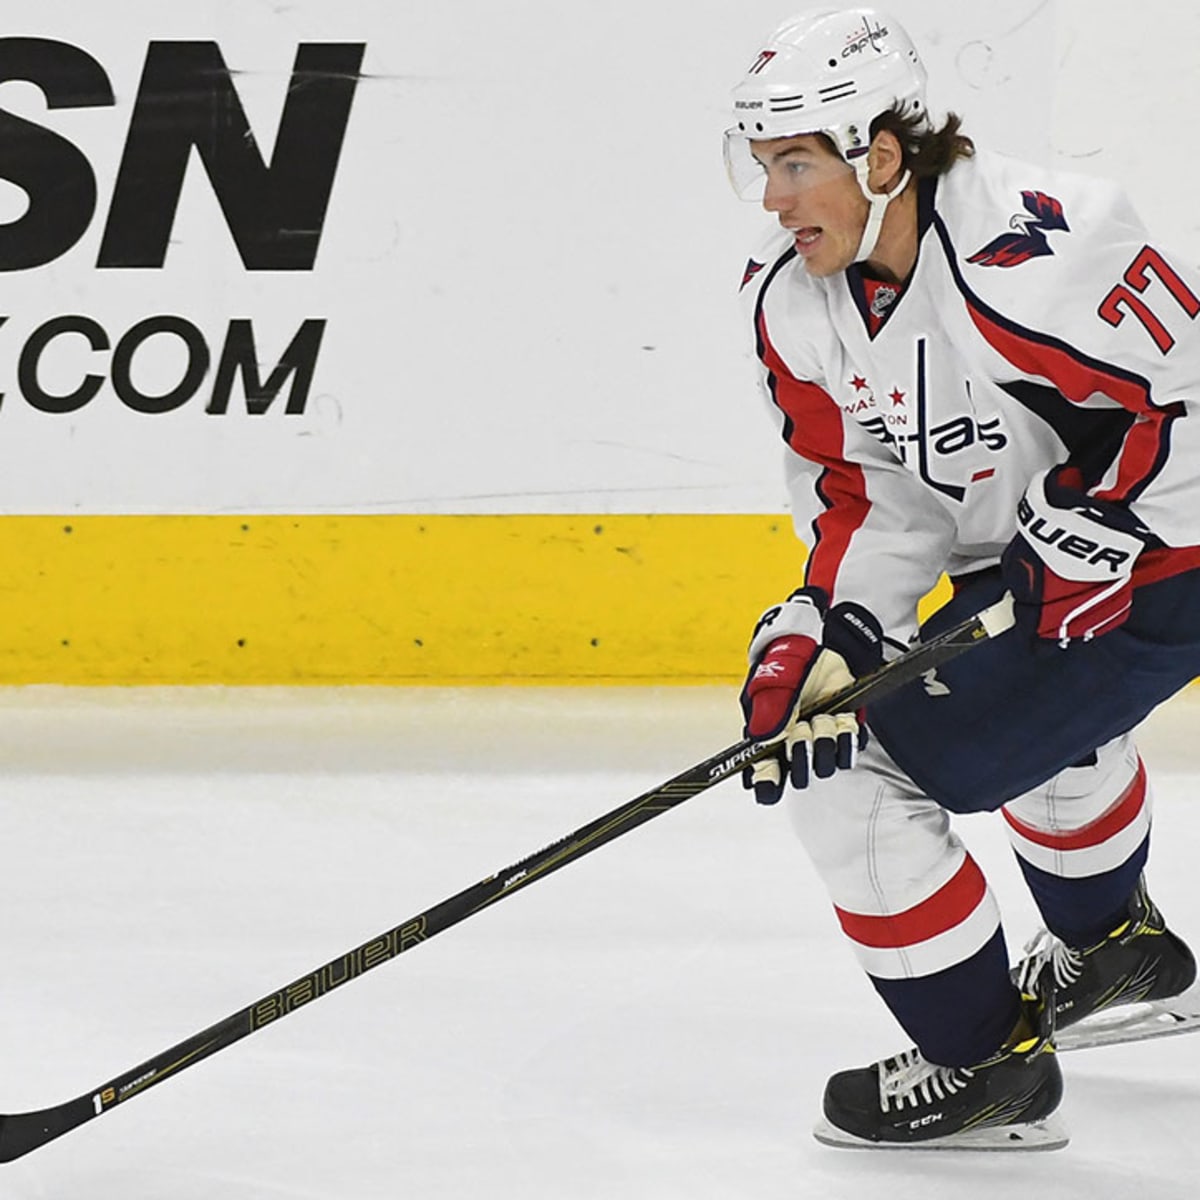 He's a hockey player': Capitals' T.J. Oshie is playing hurt and